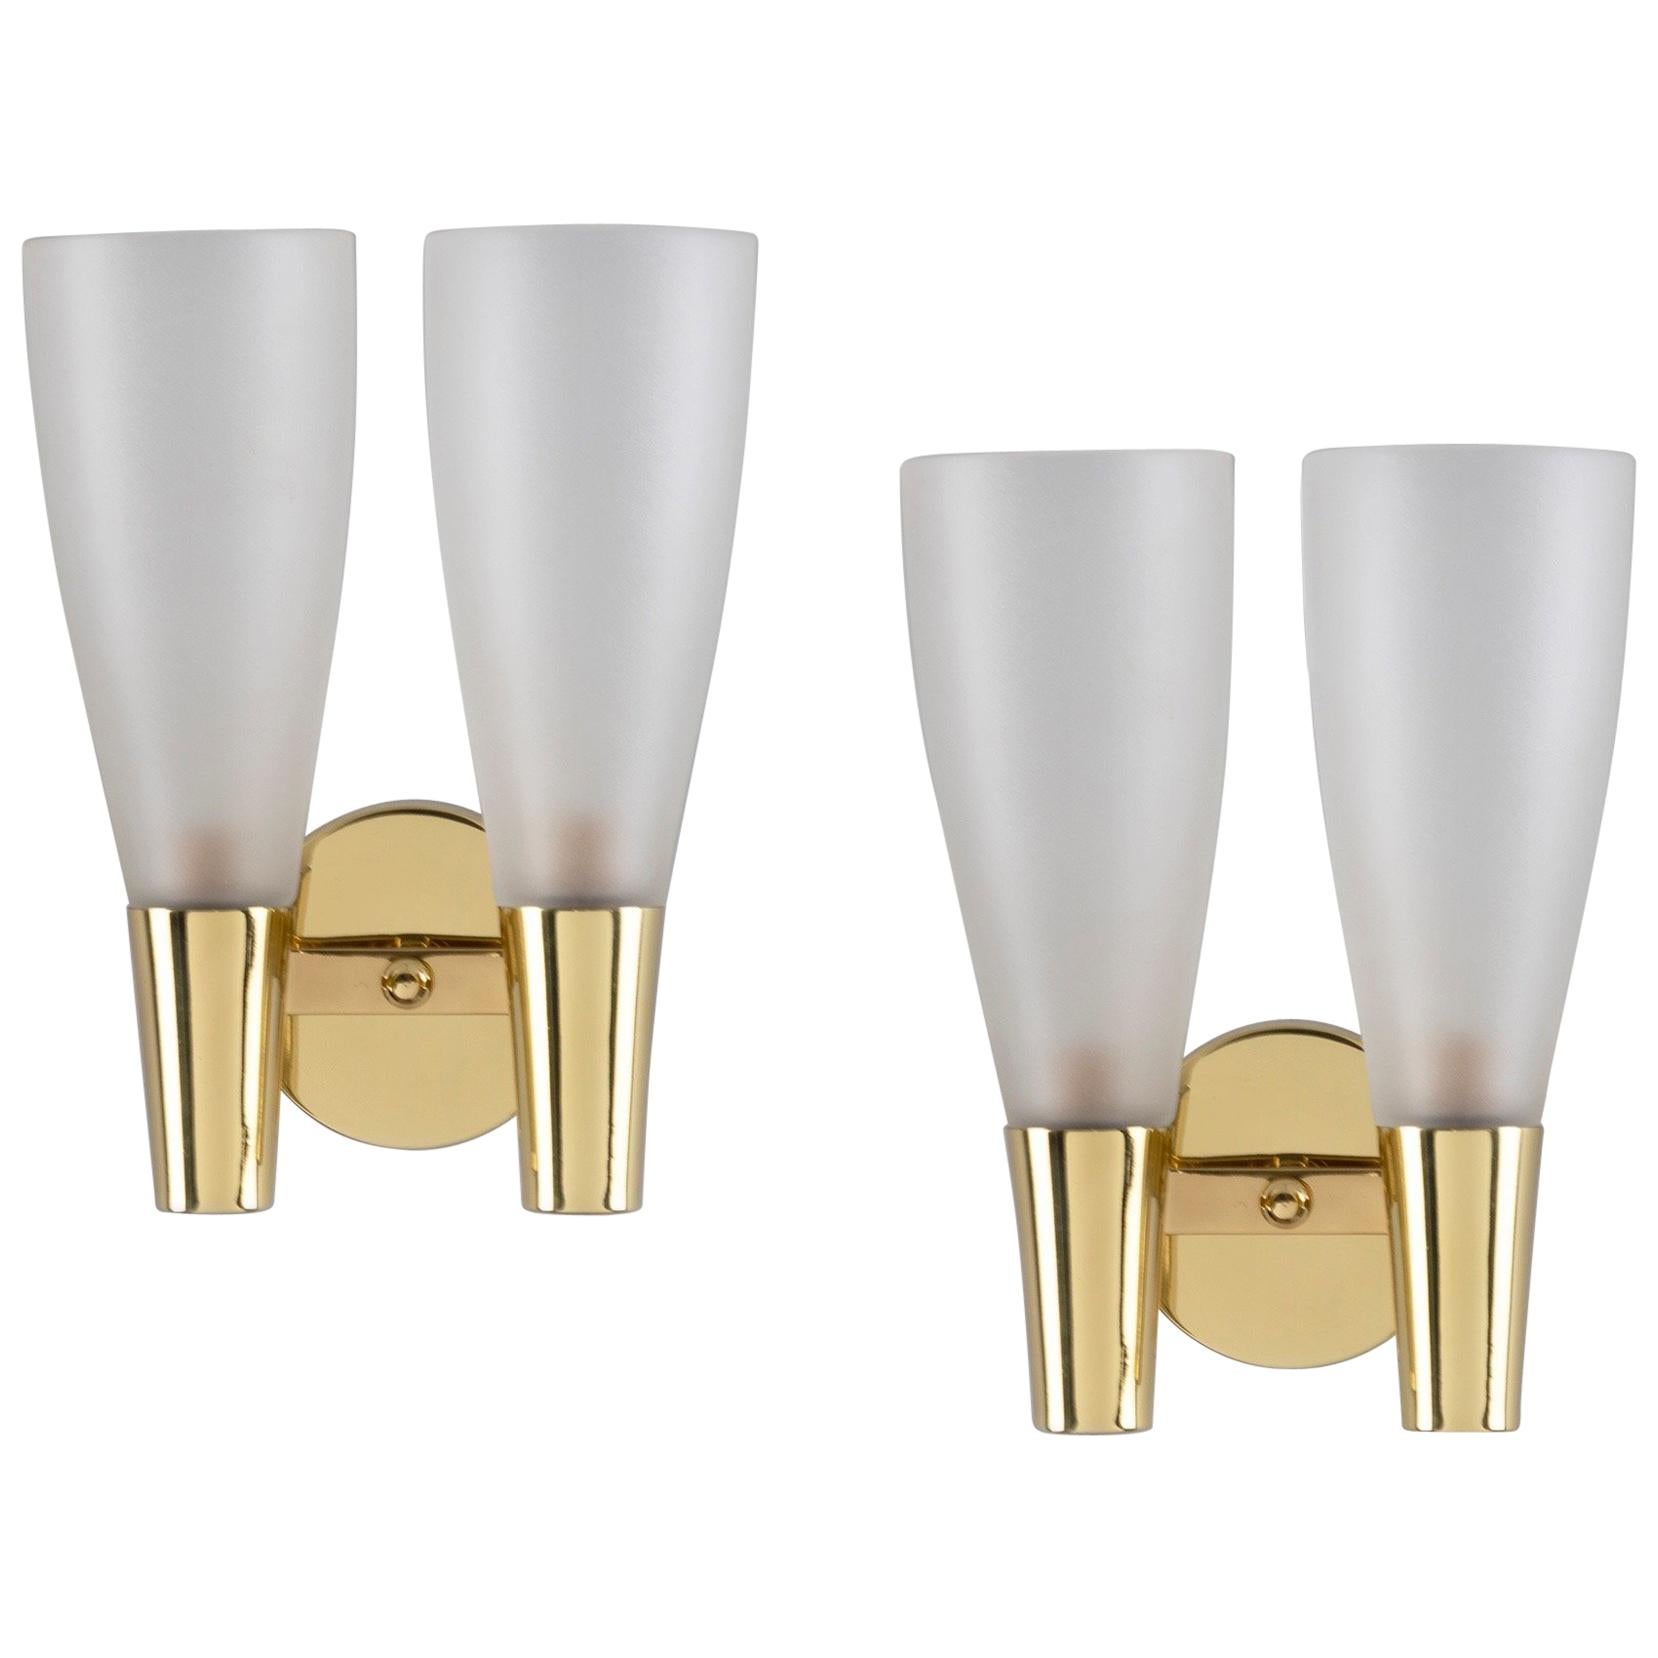 Pietro Chiesa for Fontana Arte Brass Sconces with Two Glass Shades, Italy 1940s